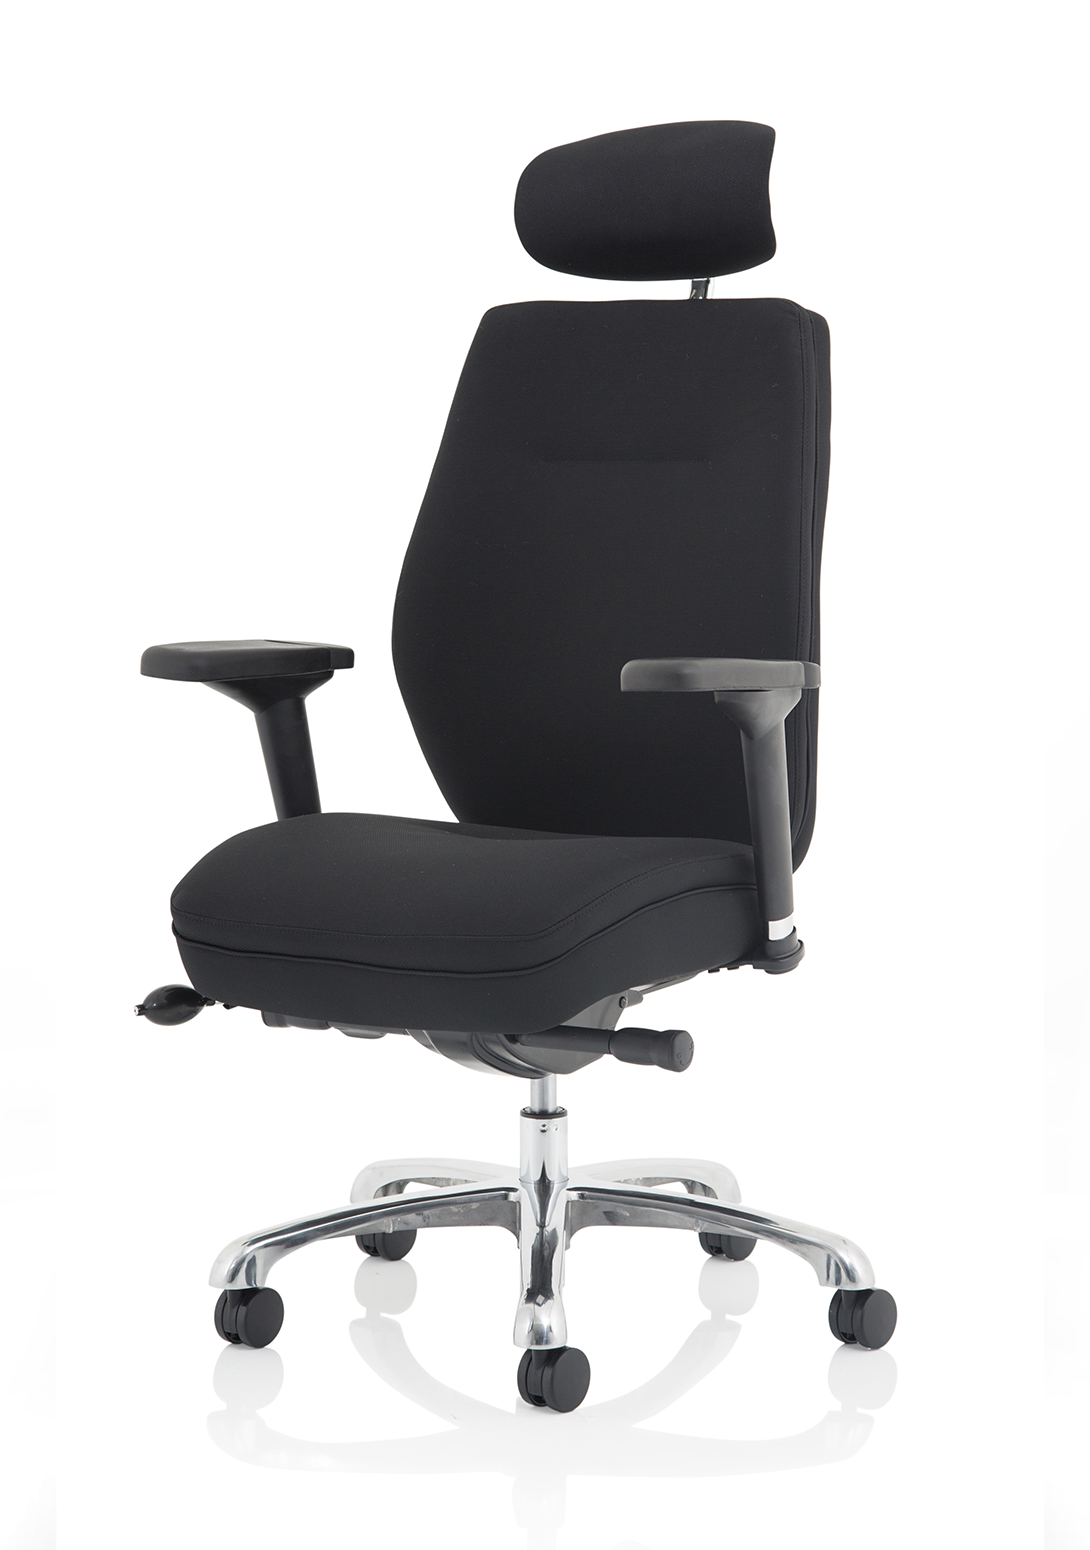 Domino Posture Chair | Home Office Chair | Home Office Furniture | Ergonomic Chair | Ergonomic Office Furniture | Posture Chair | Combat poor posture | Chairs that help posture